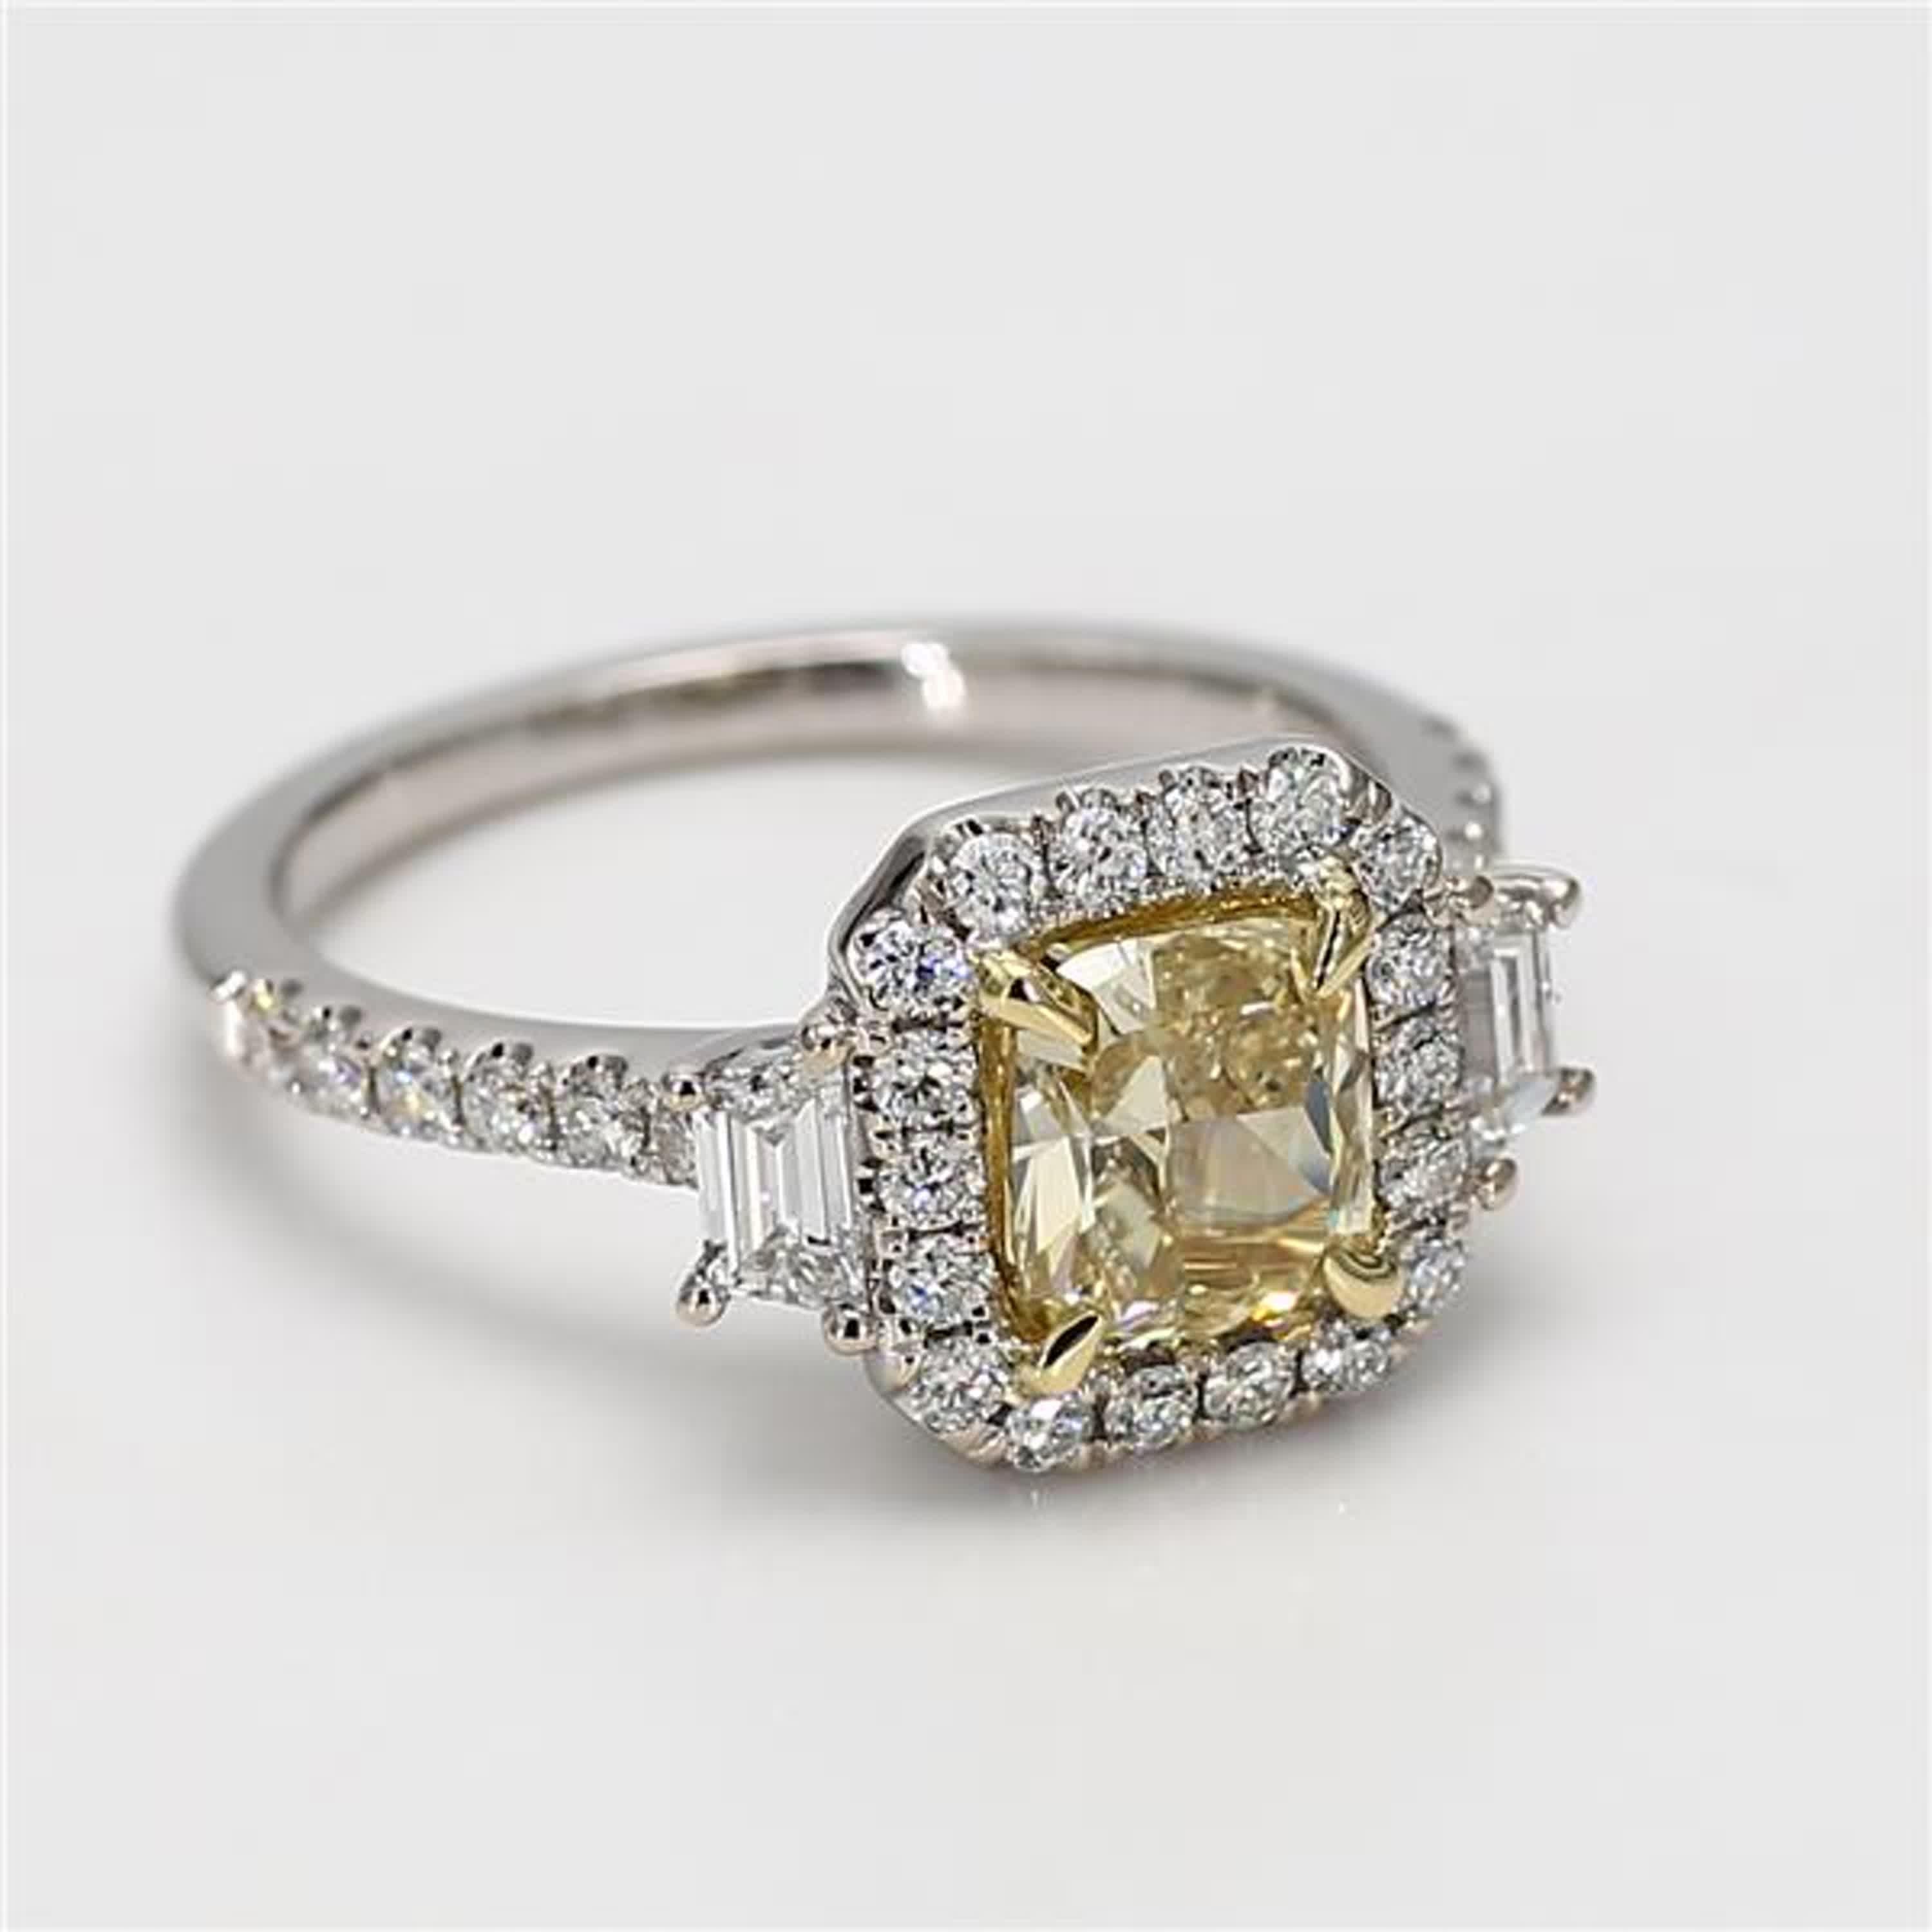  GIA Certified Natural Yellow Cushion Diamond 2.13 Carat TW Gold Cocktail Ring Pour femmes 